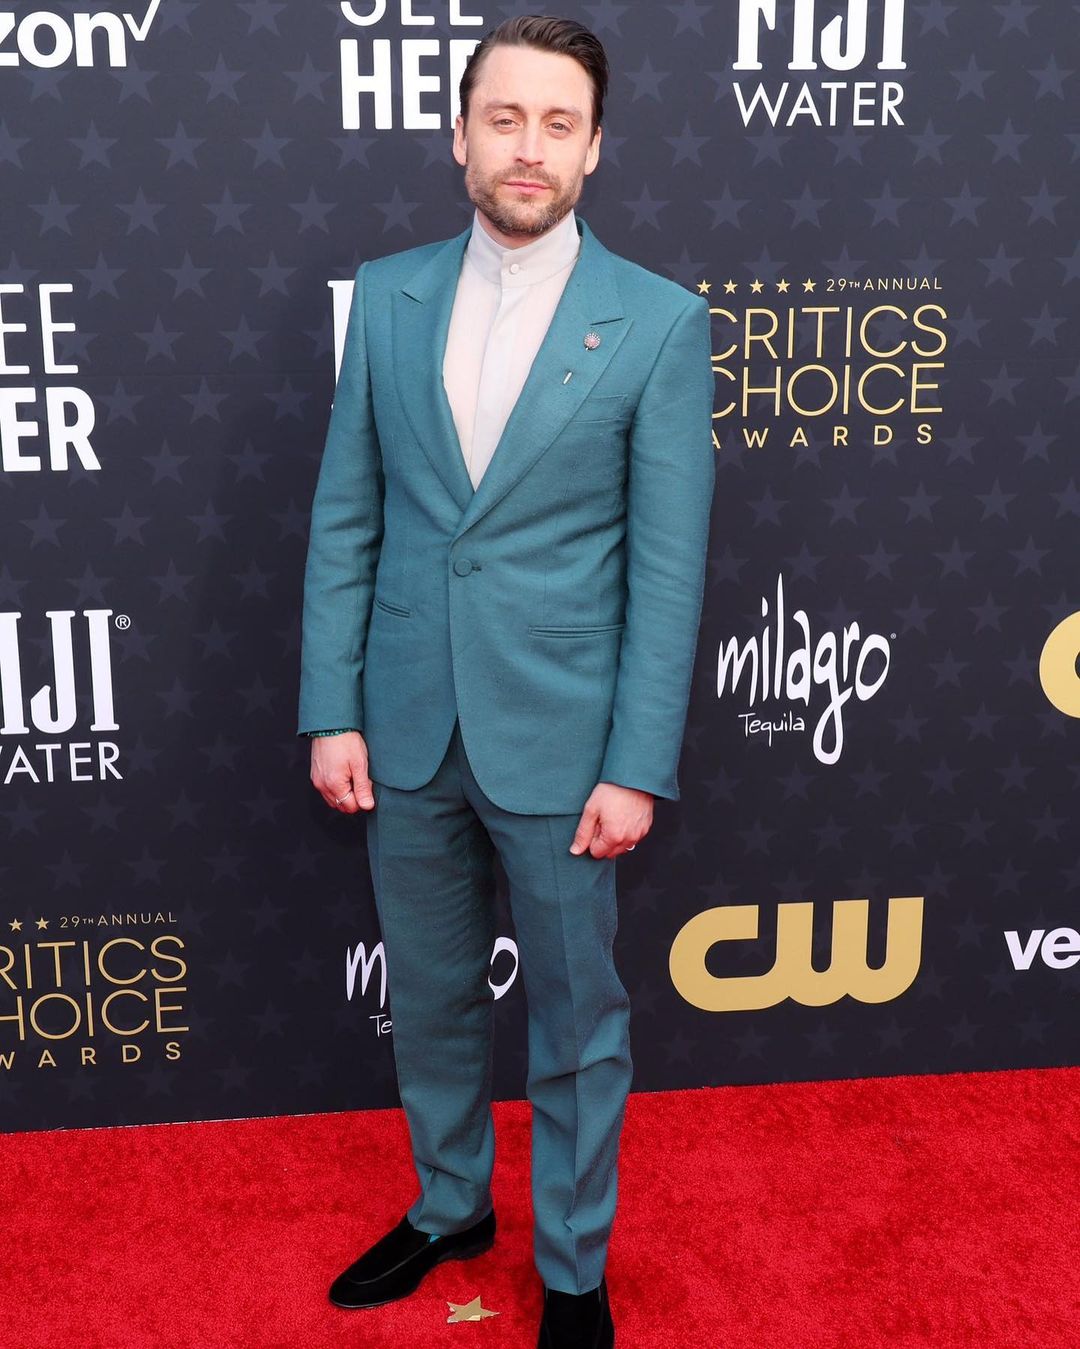 Culkin looked elegant in a light-blue Zegna suit with a classy white shirt with a Chinese collar. The actor accessorized his ensemble with a sophisticated lapel pin and a beaded wrist stack. Kieran Culkin took home TV’s Favorite Dramatic Actor prize for his work in Succession at the prestigious 2024 Critics Choice Awards night.